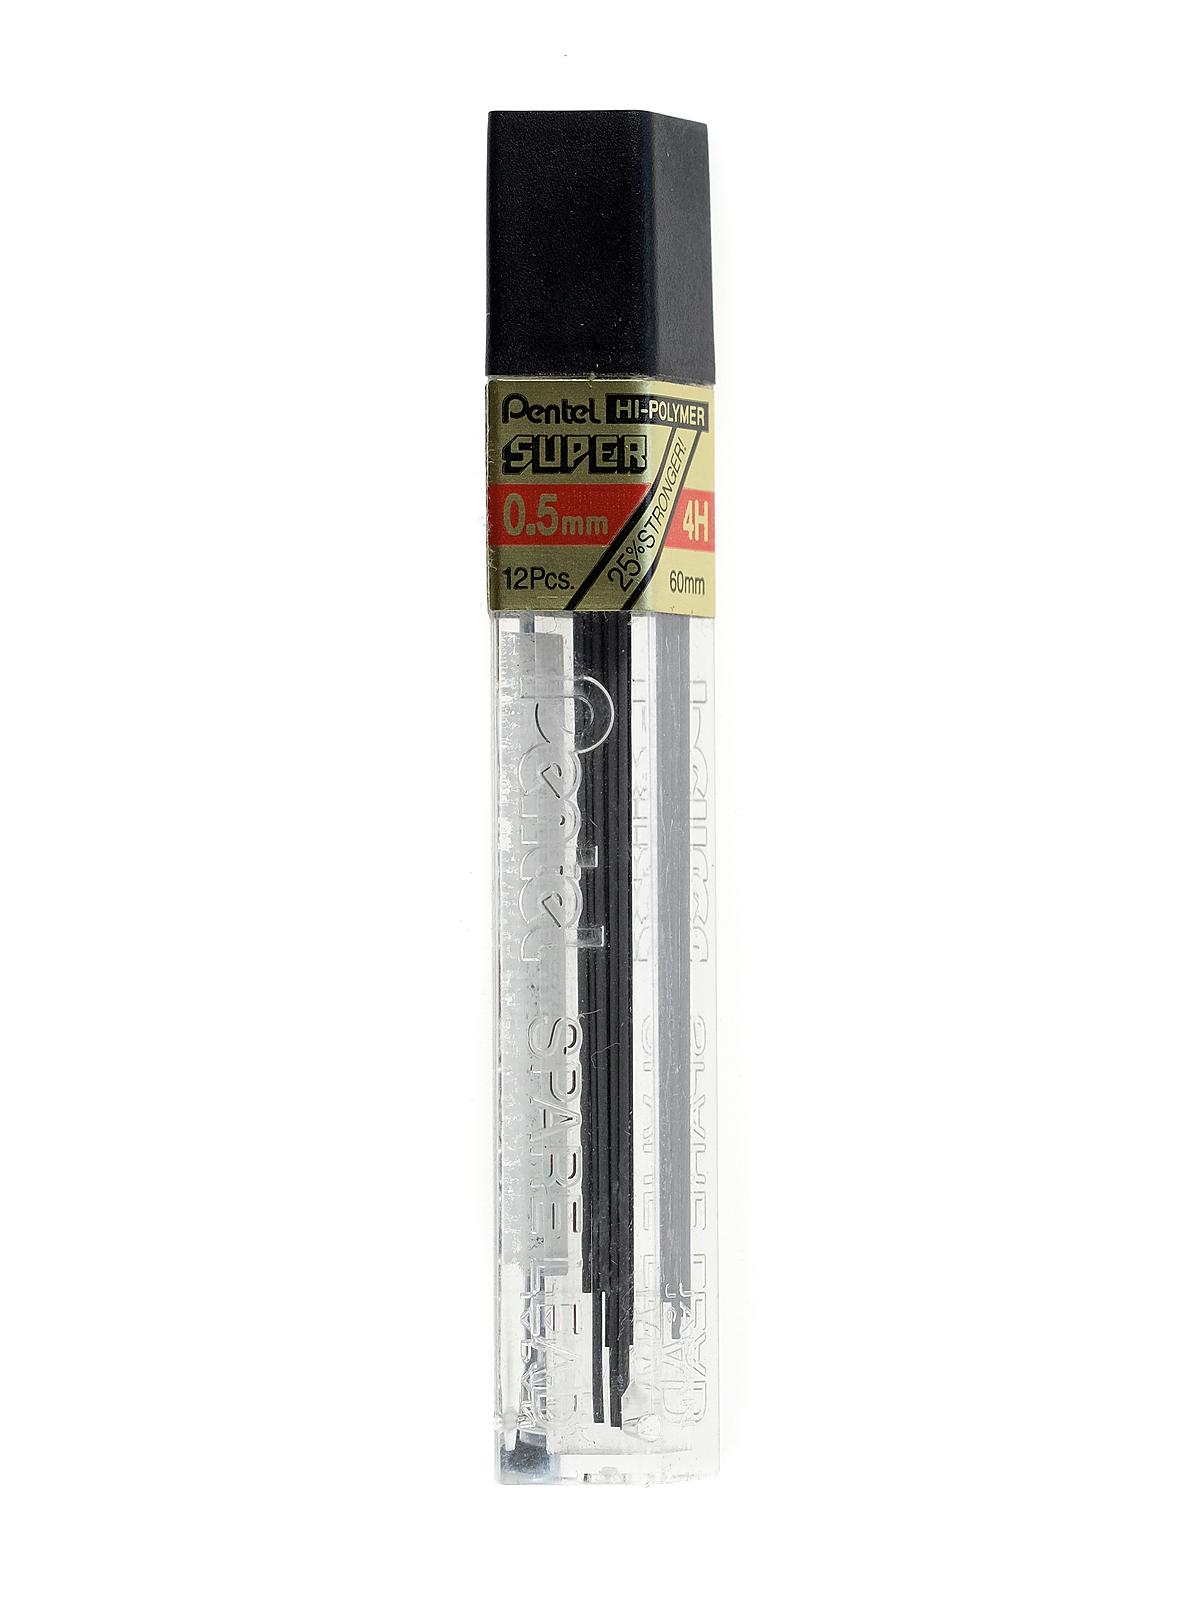 Super Hi-Polymer Refill Leads 4H 0.5 Mm Tube Of 12